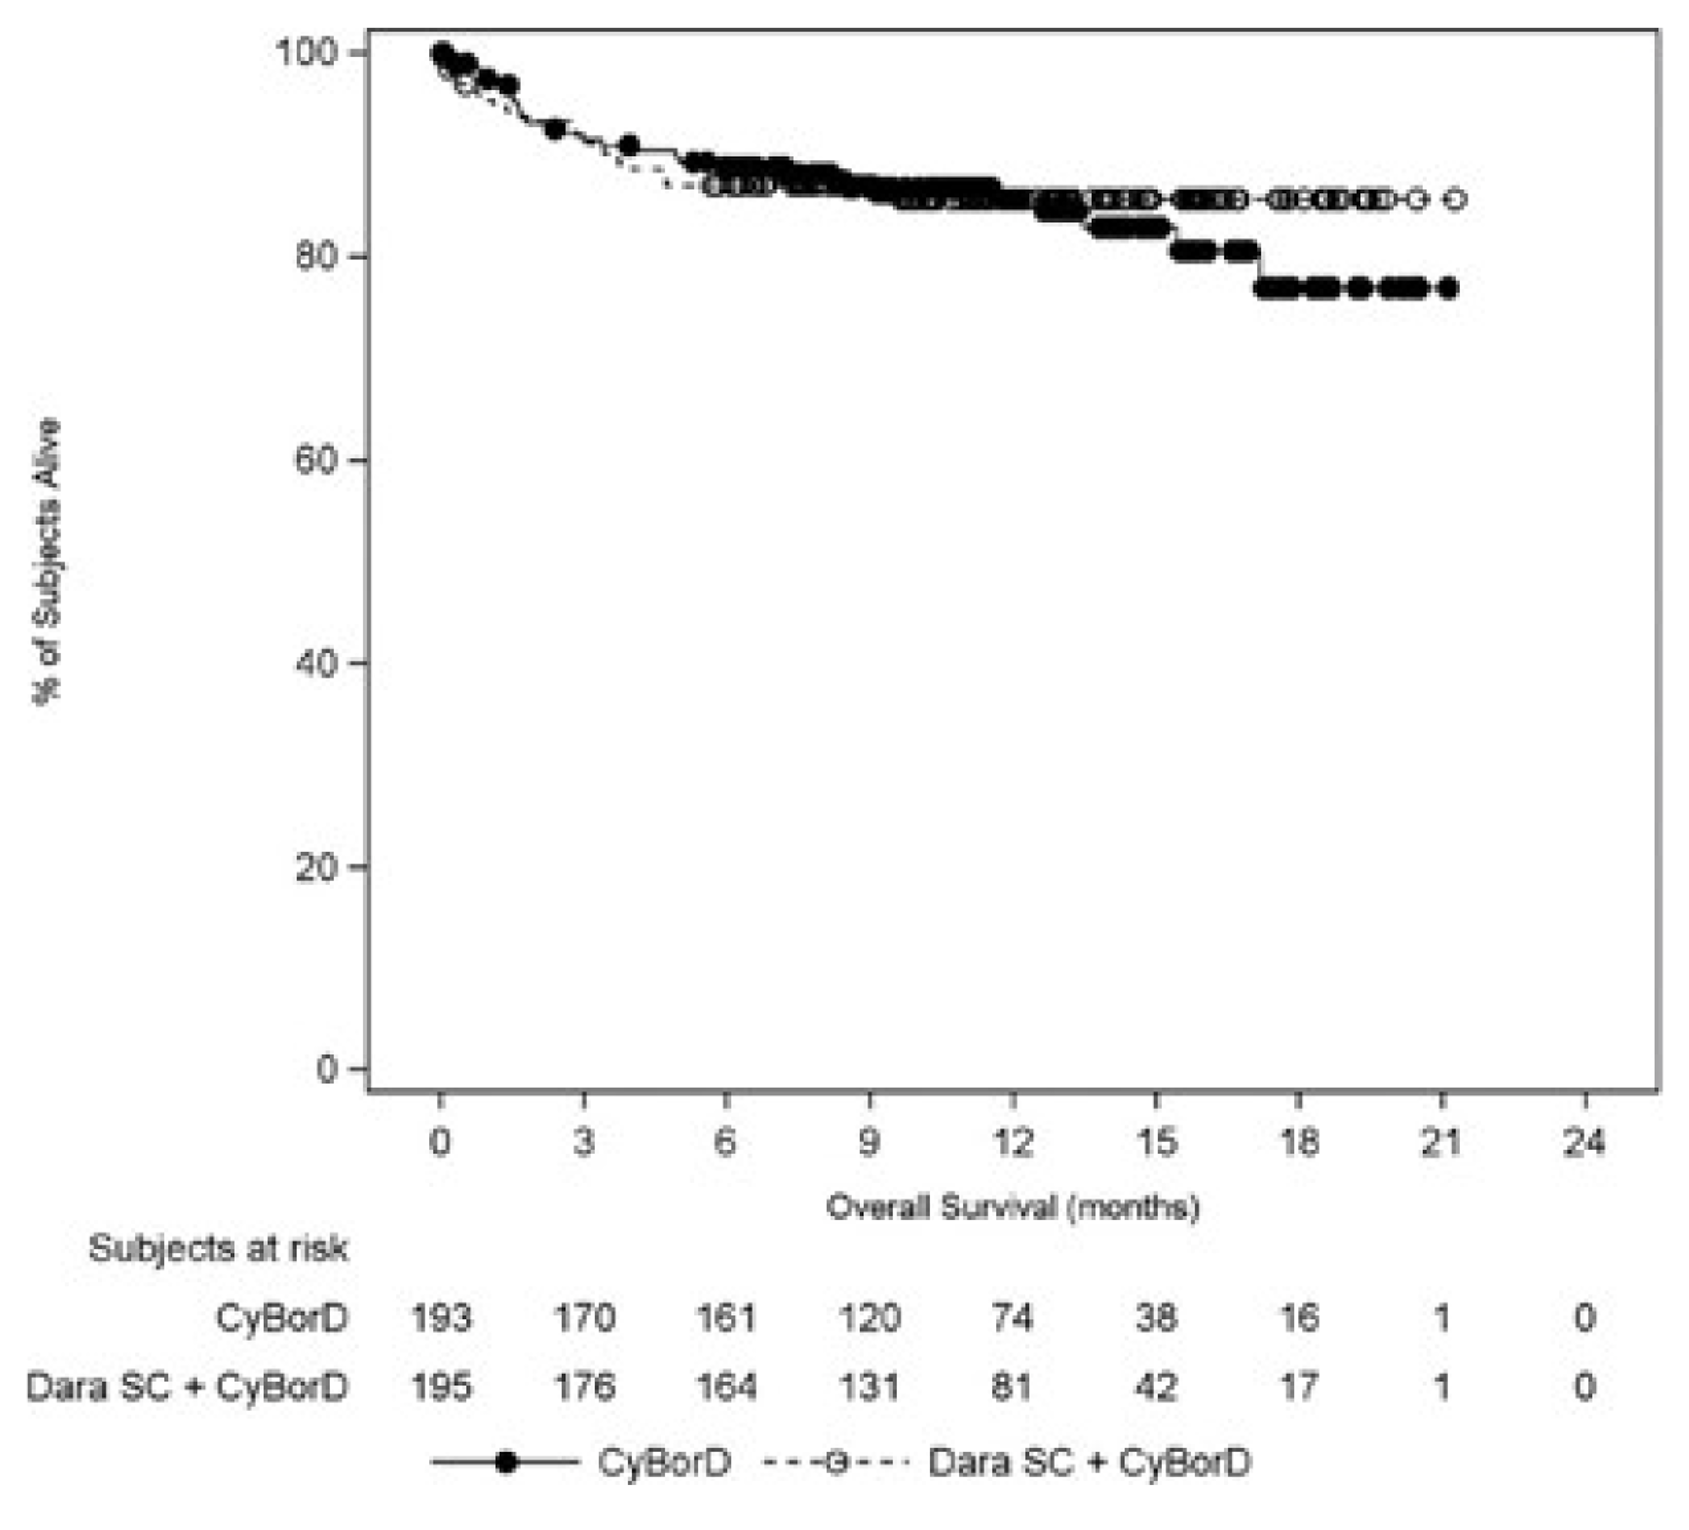 Kaplan-Meier curves for OS with CyBorD versus DCyBorD with the x-axis as overall survival in months and the y-axis as the percentage of patients alive. The curves overlap initially and start to separate after 12 months with a higher proportion of patients alive in the DCyBorD arm. This trend continues to OS 24 months.